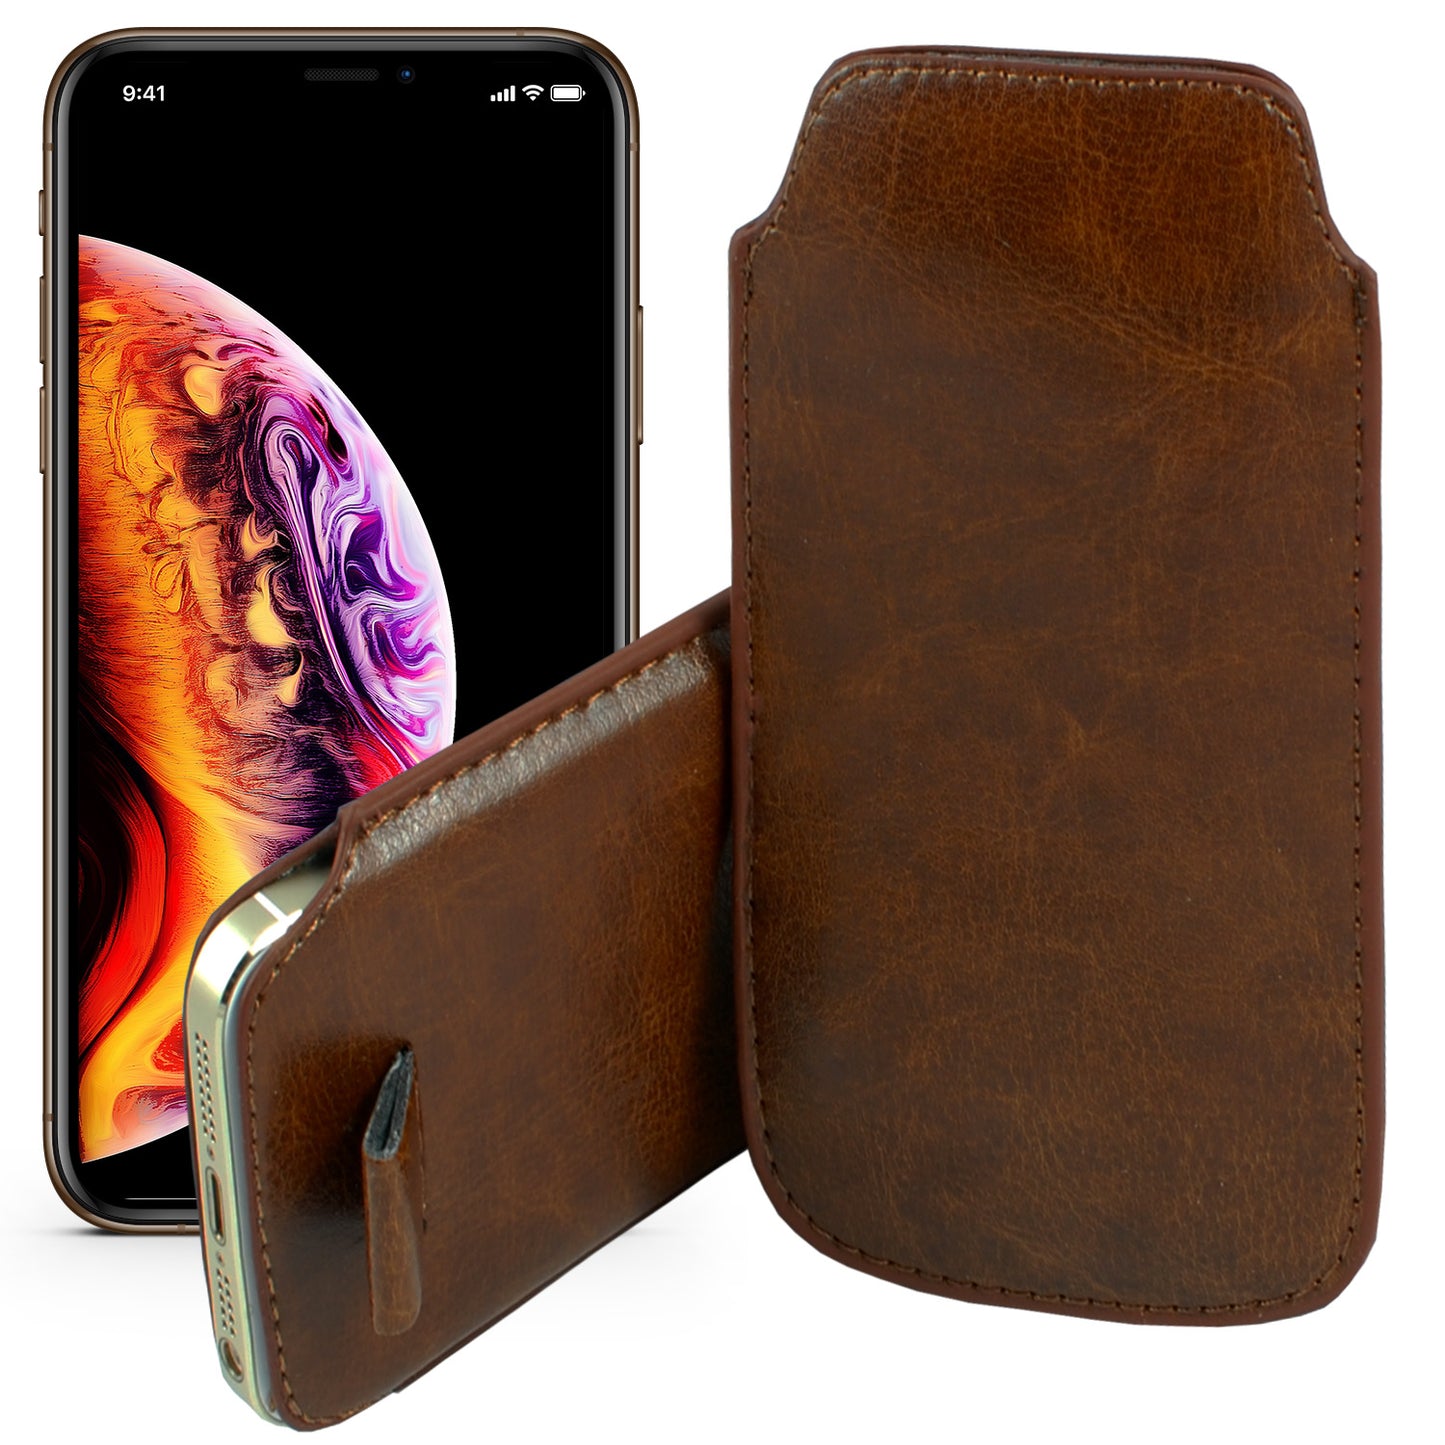 MEZON Apple iPhone 11 Pro (5.8") Brown Pull Tab Slim Faux Leather Pouch Sleeve Case Wireless Charging Compatible